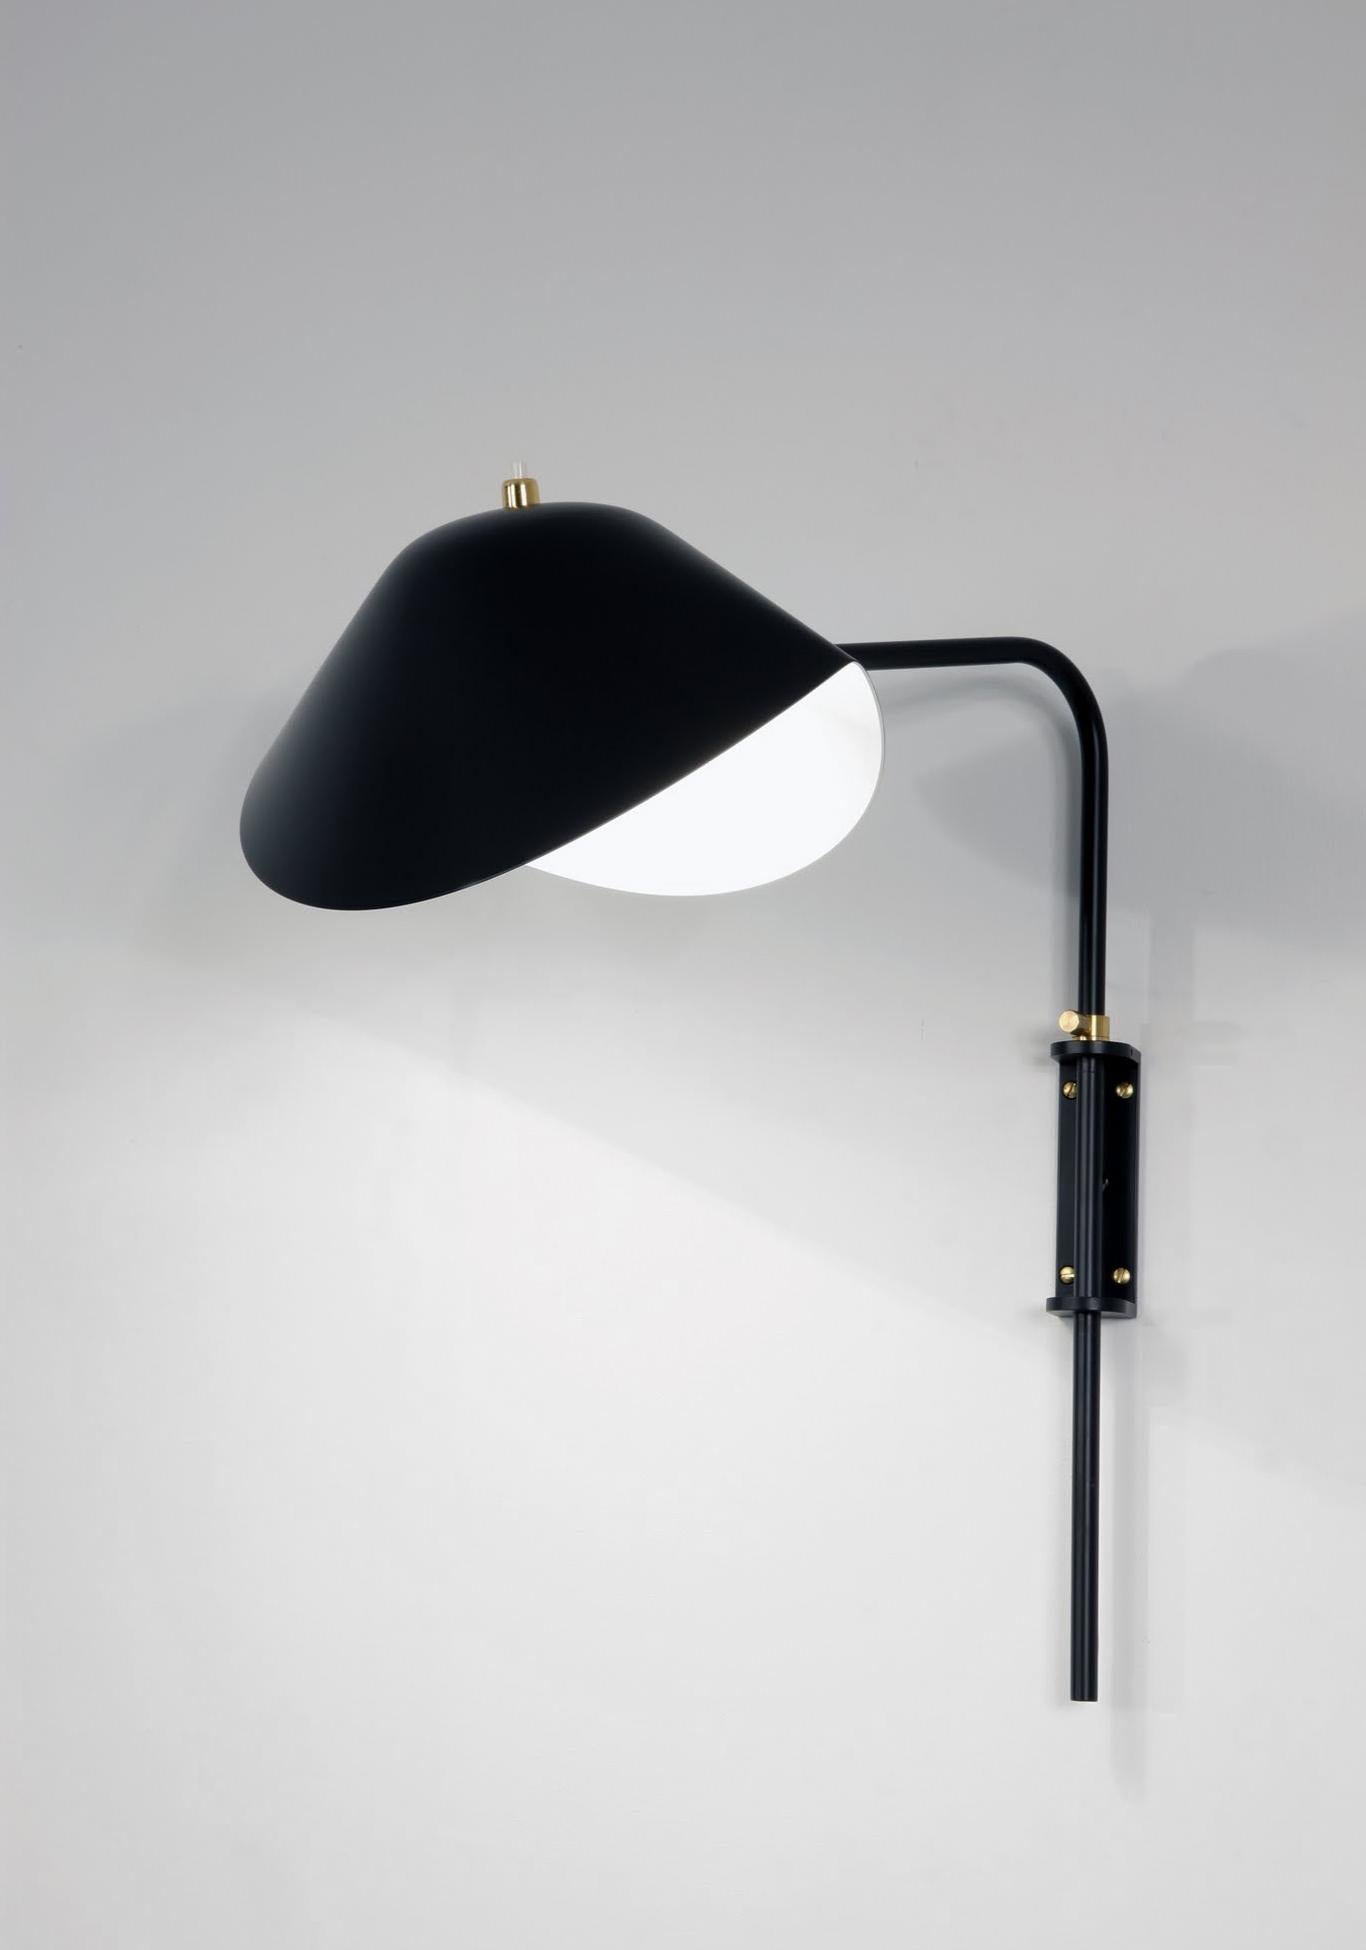 Aluminum Serge Mouille Mid-Century Modern Black Anthony Wall Lamp Whit Fixing Bracket For Sale